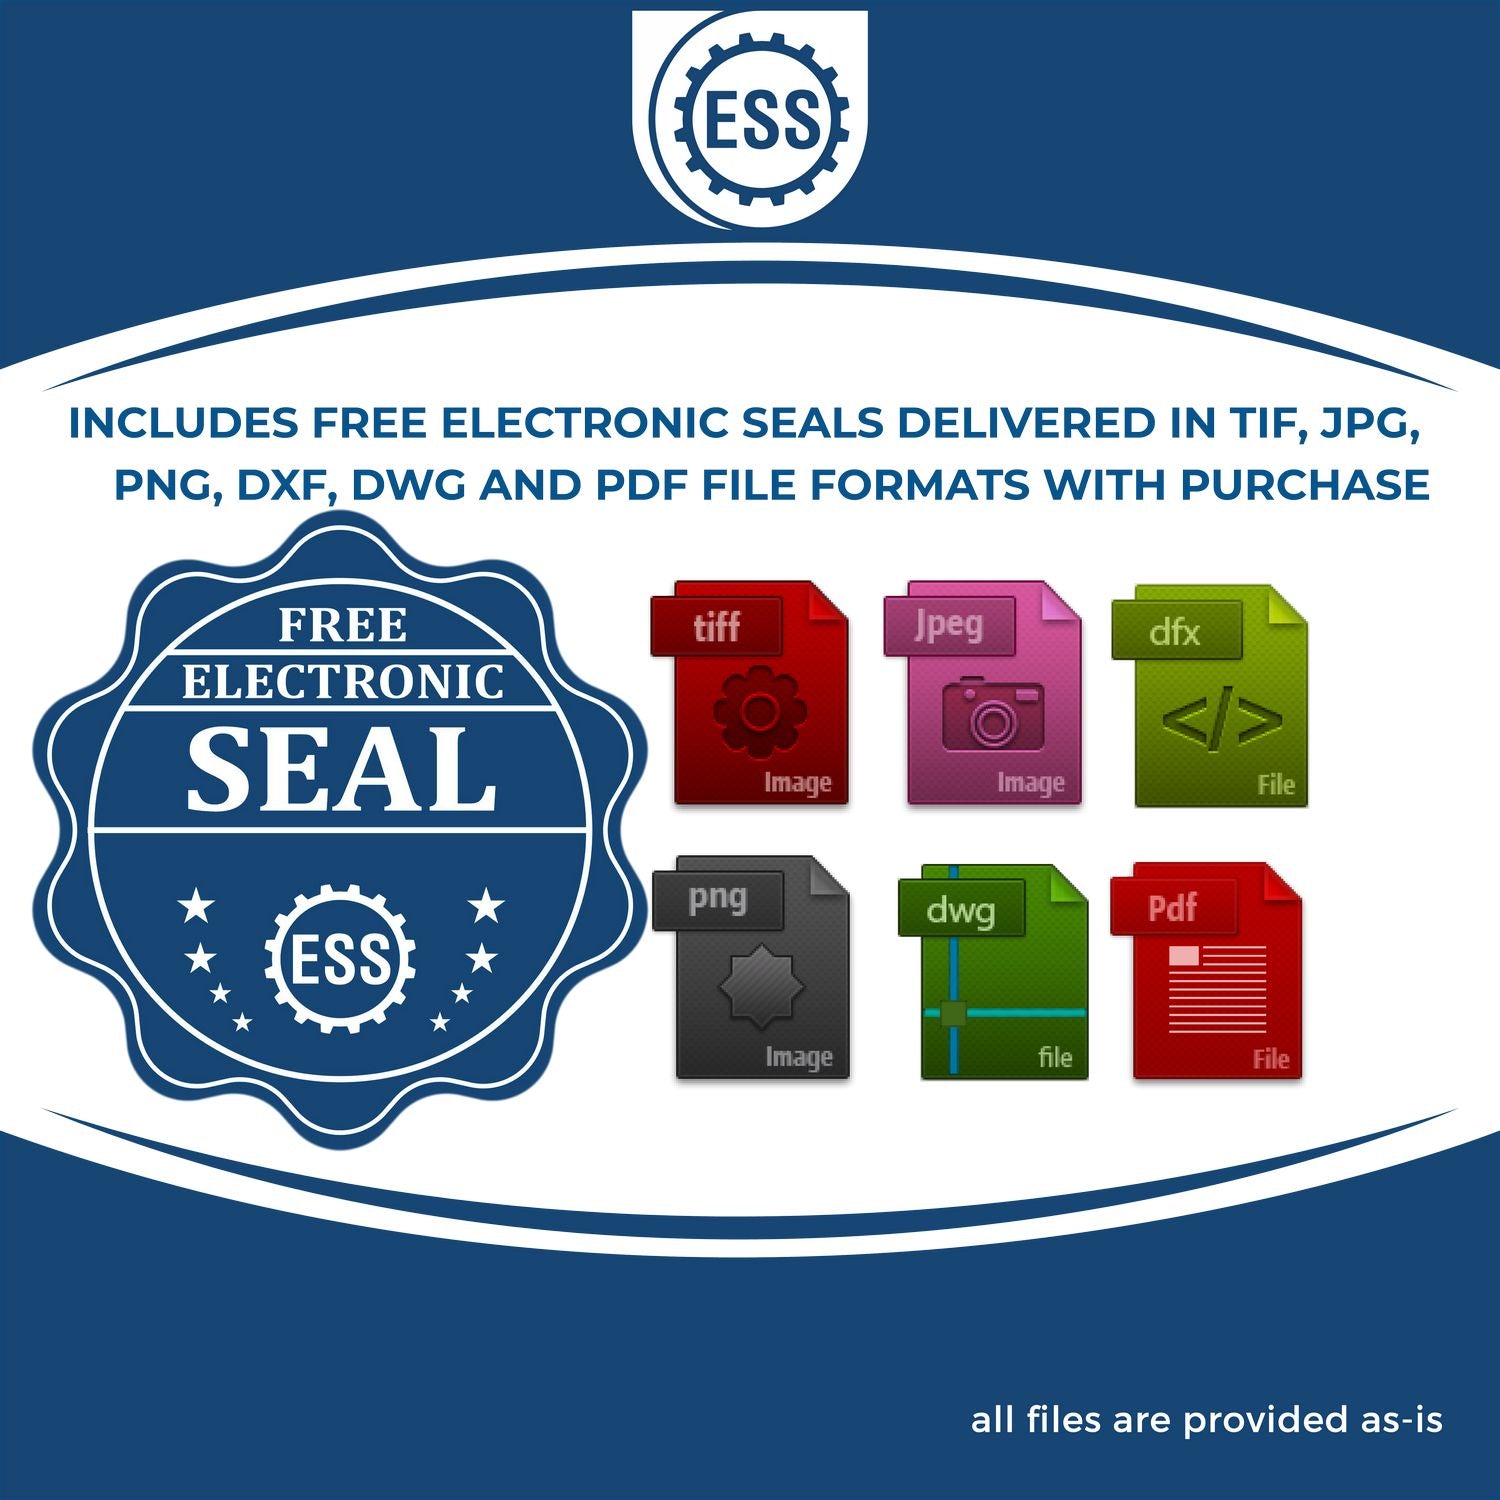 An infographic for the free electronic seal for the State of Tennessee Handheld Landscape Architect Seal illustrating the different file type icons such as DXF, DWG, TIF, JPG and PNG.